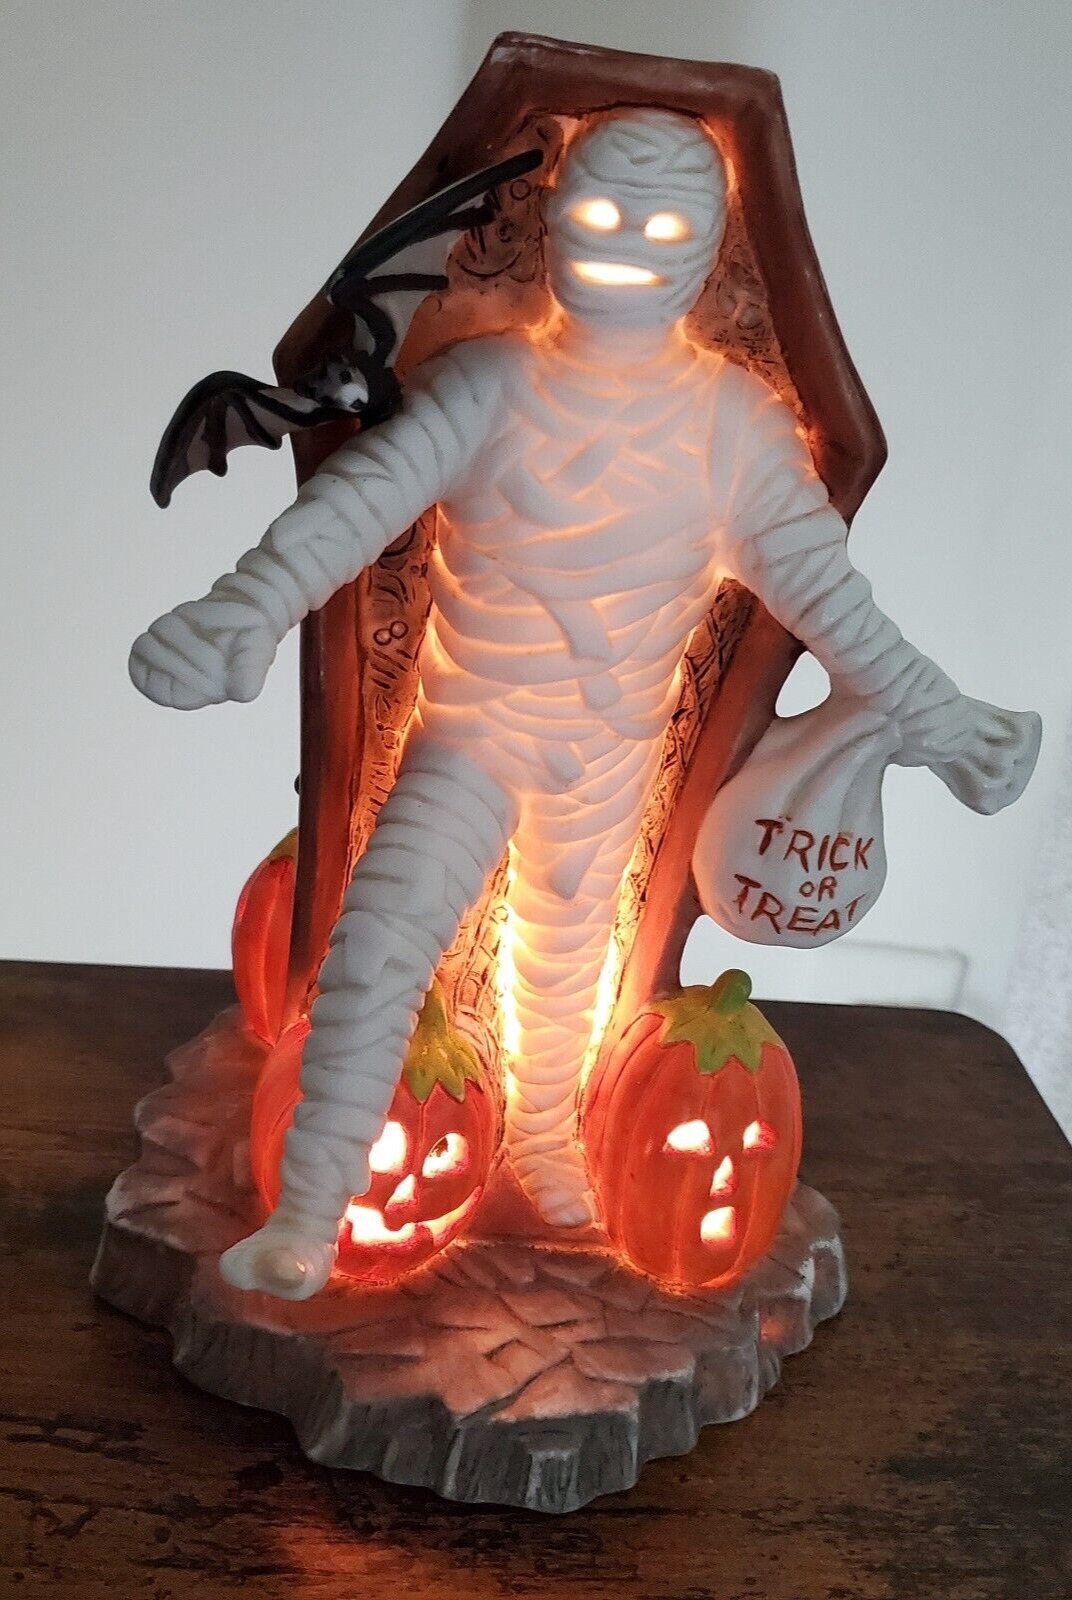 Vintage Prettique Zack the Mummy Lighted Halloween Sculpture WORKS GREAT- READ